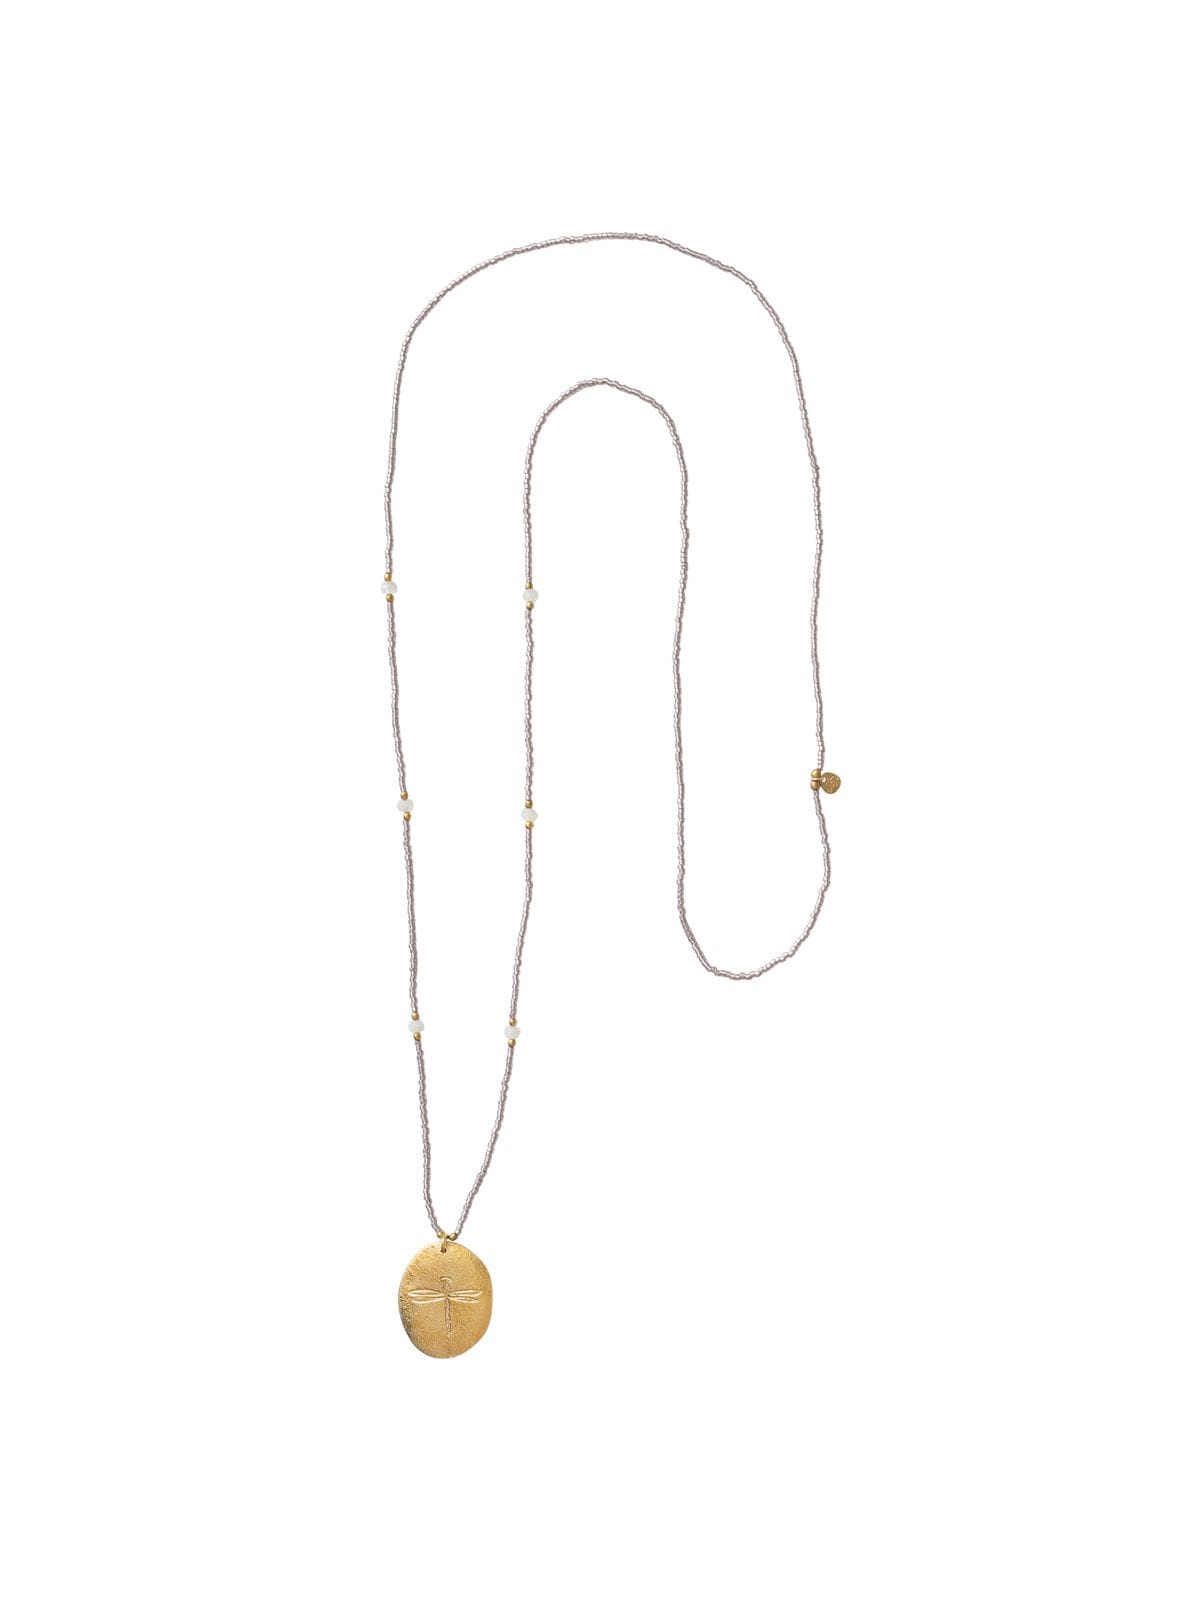 BL25416_1 - Swing Moonstone Gold Necklace_1200x1600